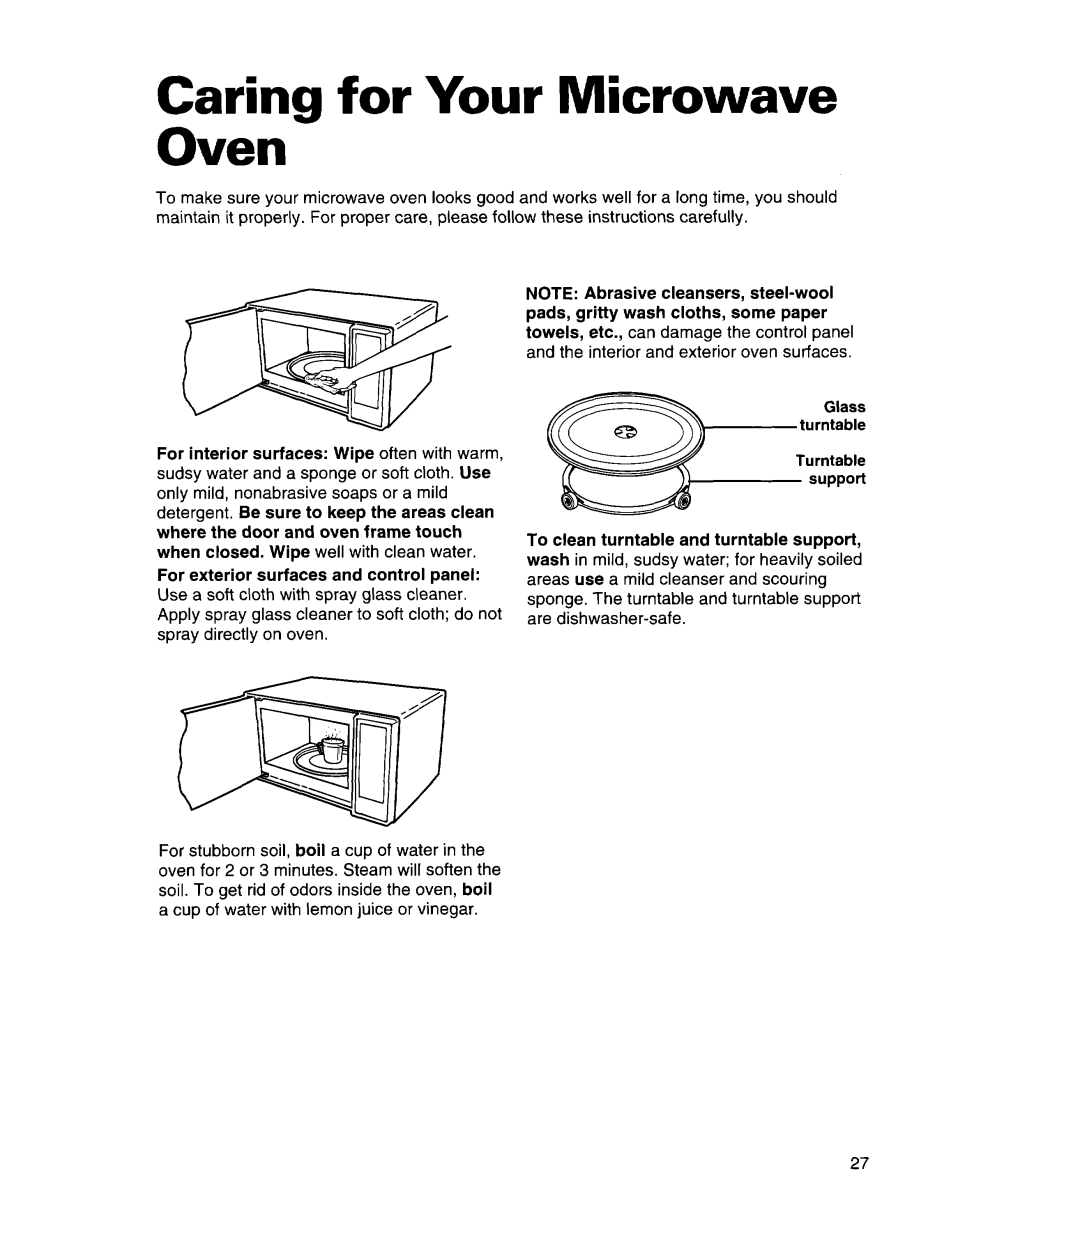 Whirlpool MT7078XD, MT7118XD, MT7116XD installation instructions Caring for Your Microwave Oven, Glass Turntable 